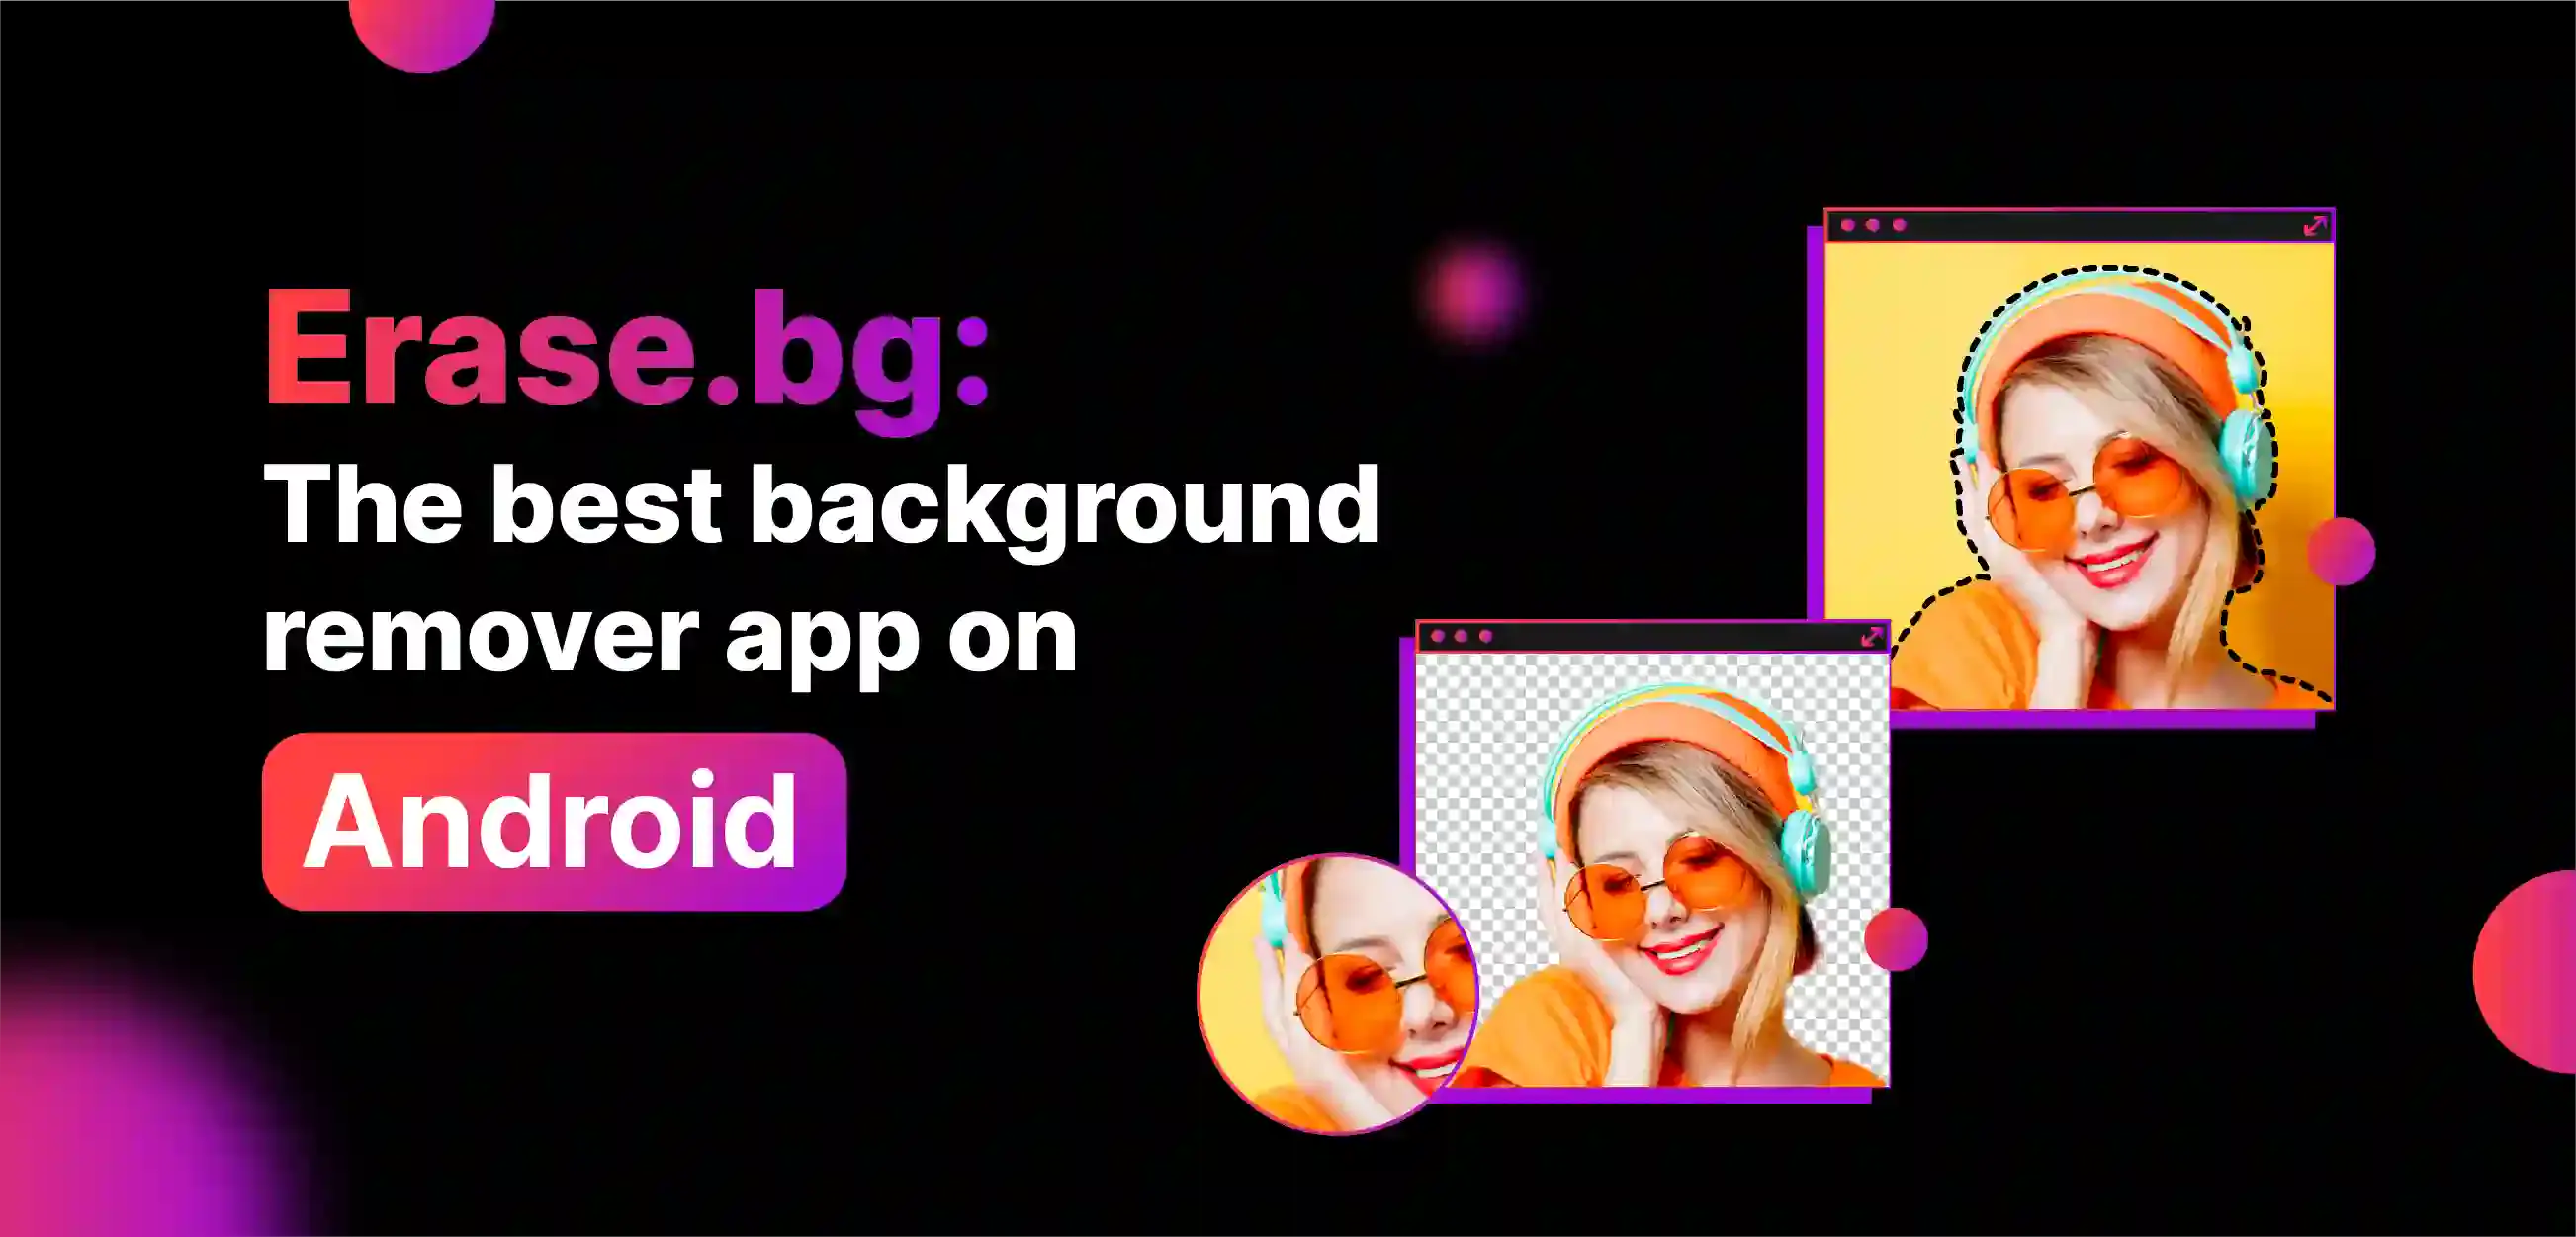 Erase.bg: The Best Background Remover App on Android